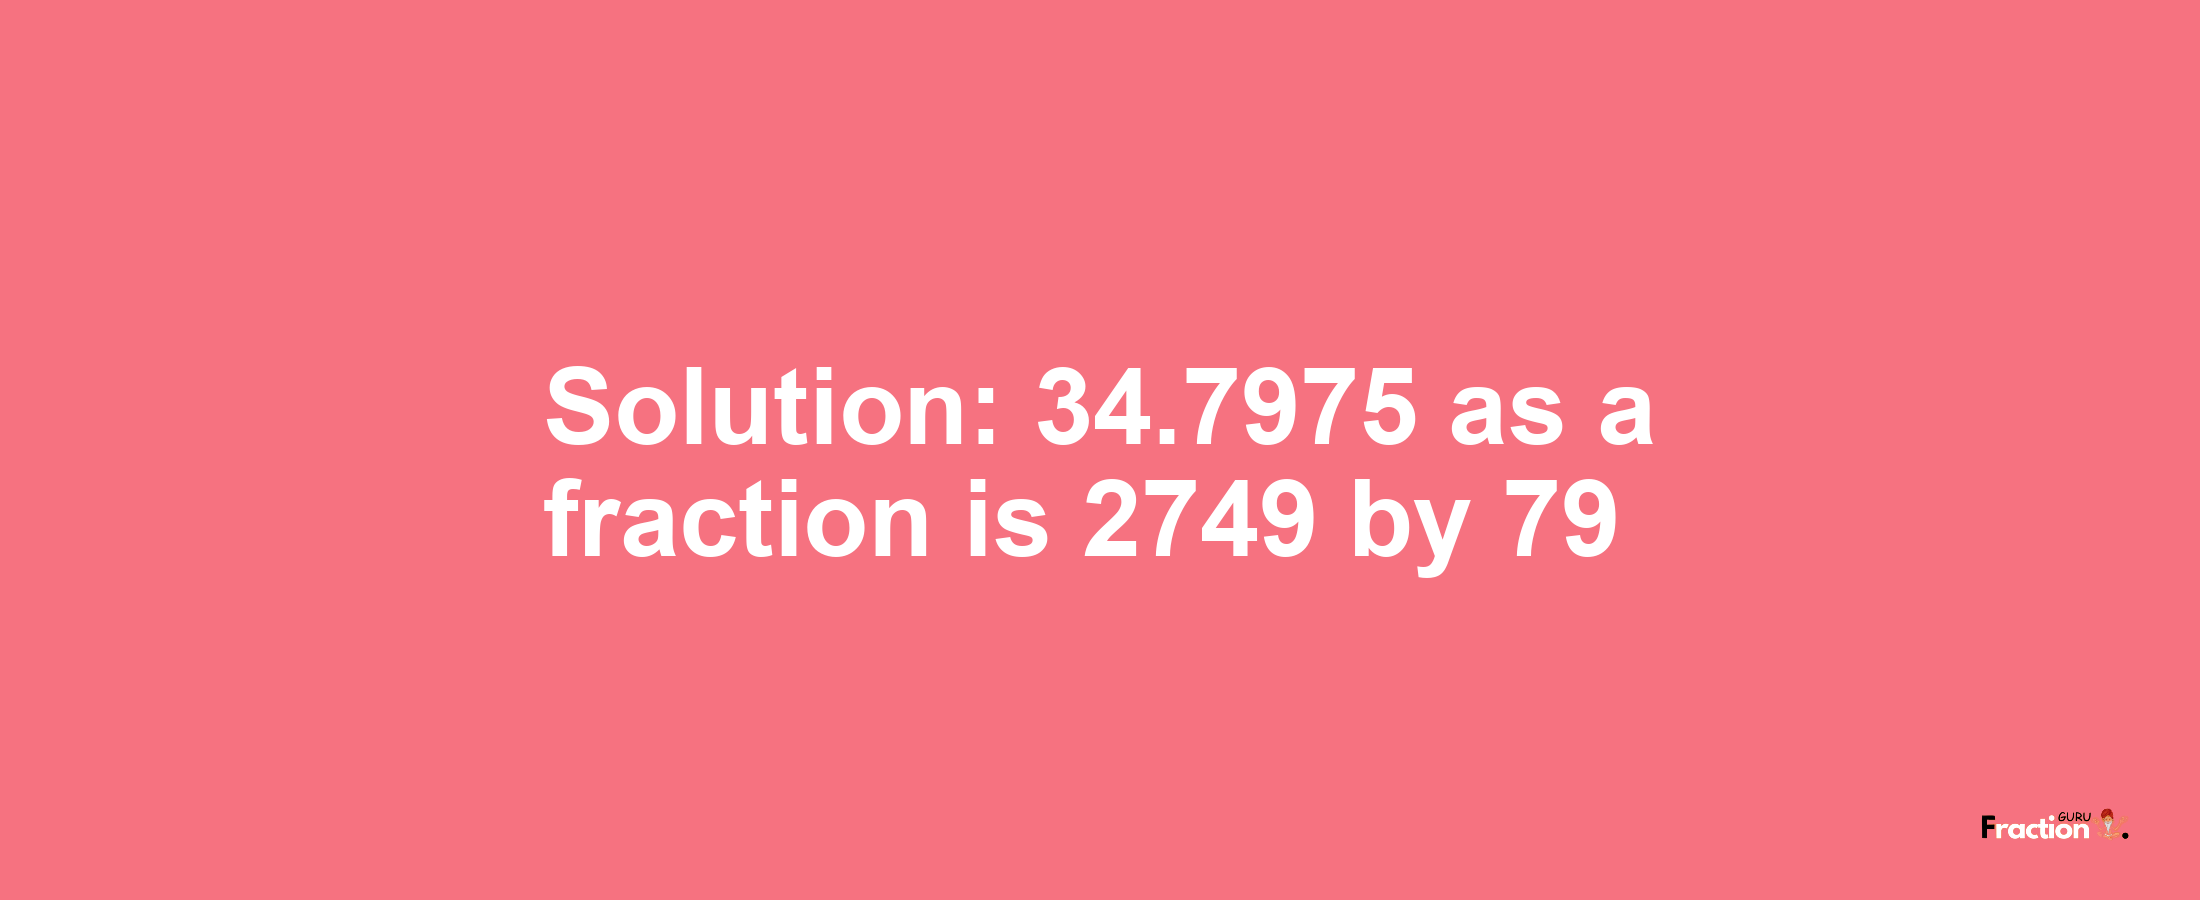 Solution:34.7975 as a fraction is 2749/79